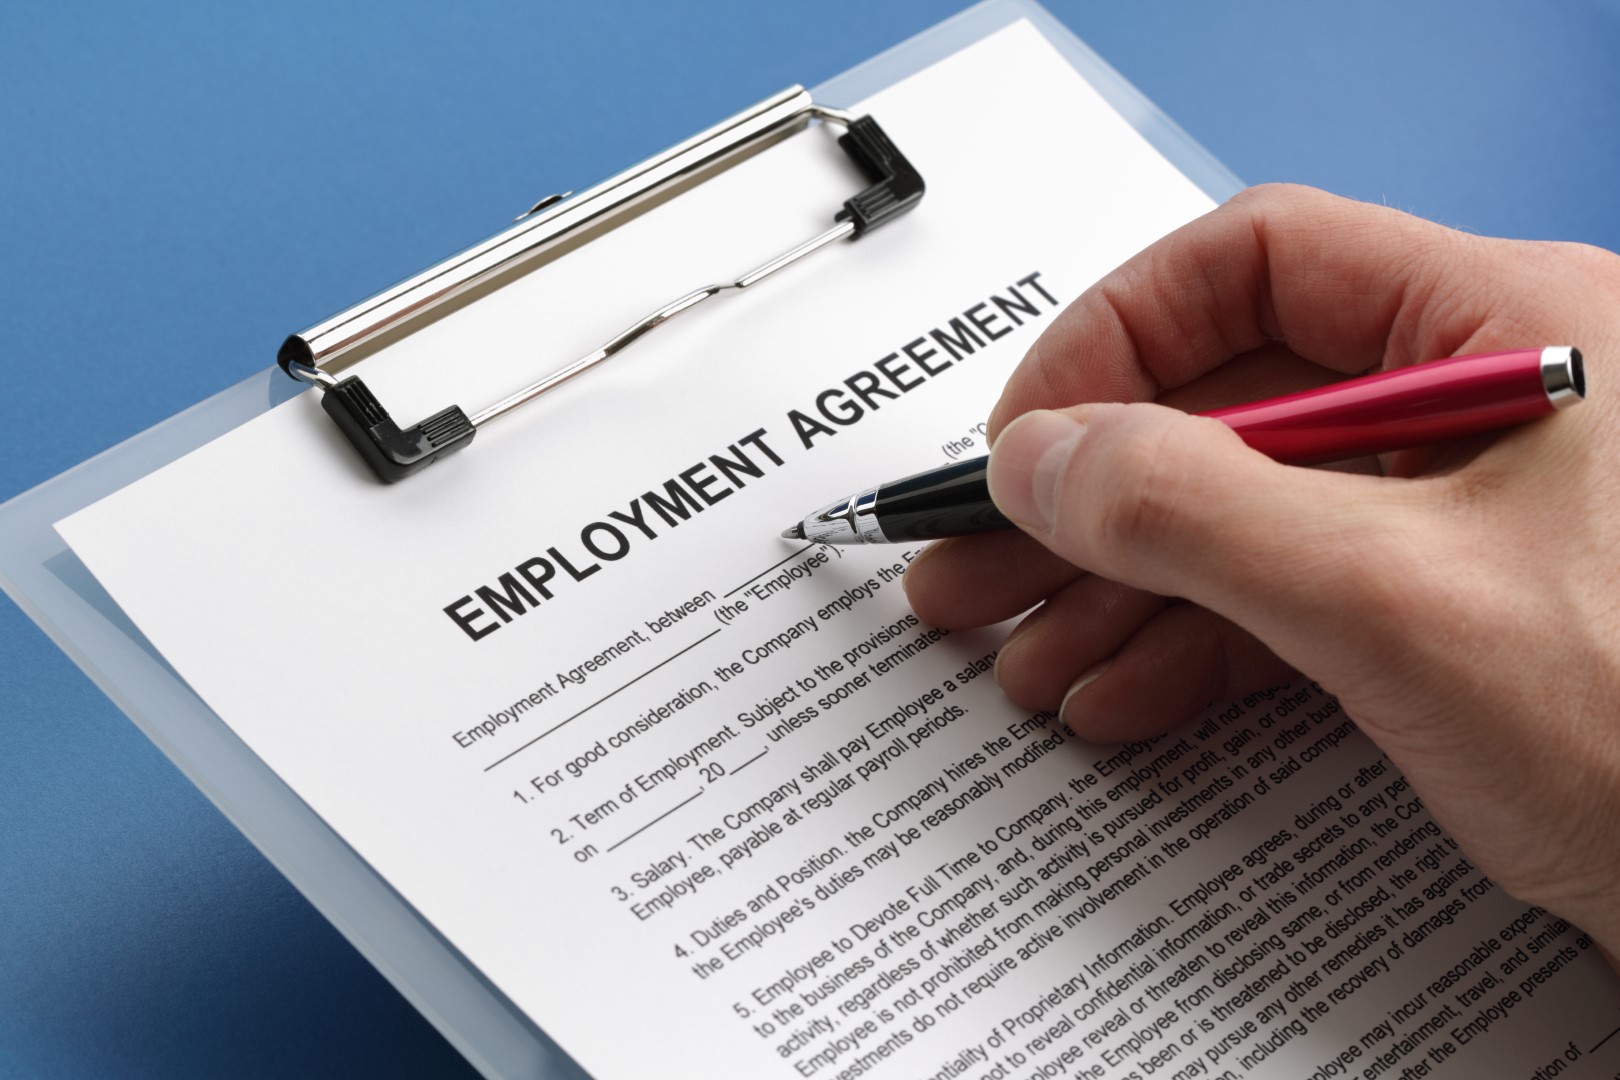 Hand using ballpoint pen to sign an employment contract.